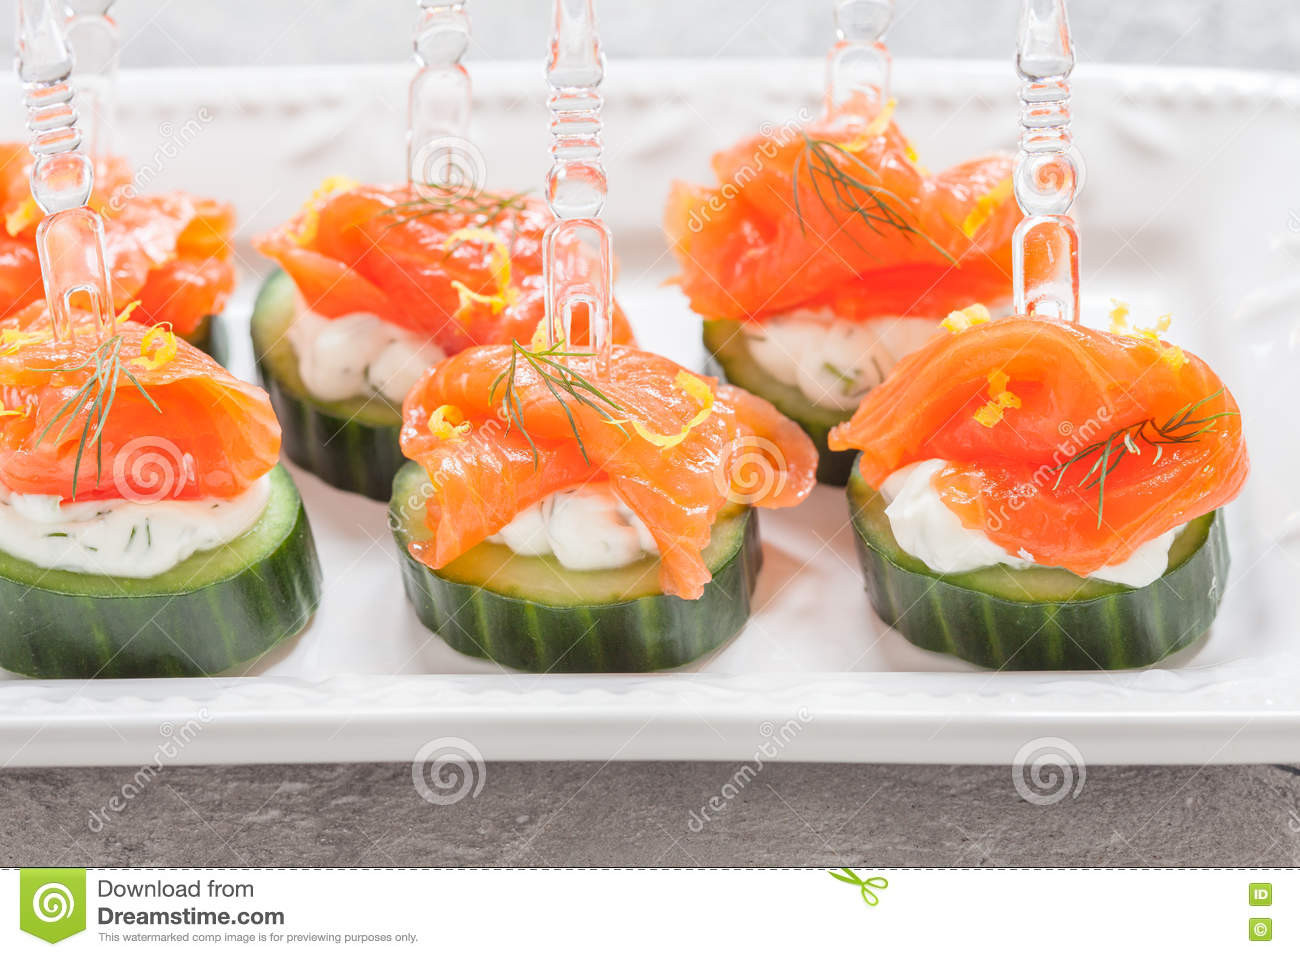 Cucumber Appetizers With Dill And Cream Cheese
 Cucumber With Dill Cream Cheese And Smoked Salmon